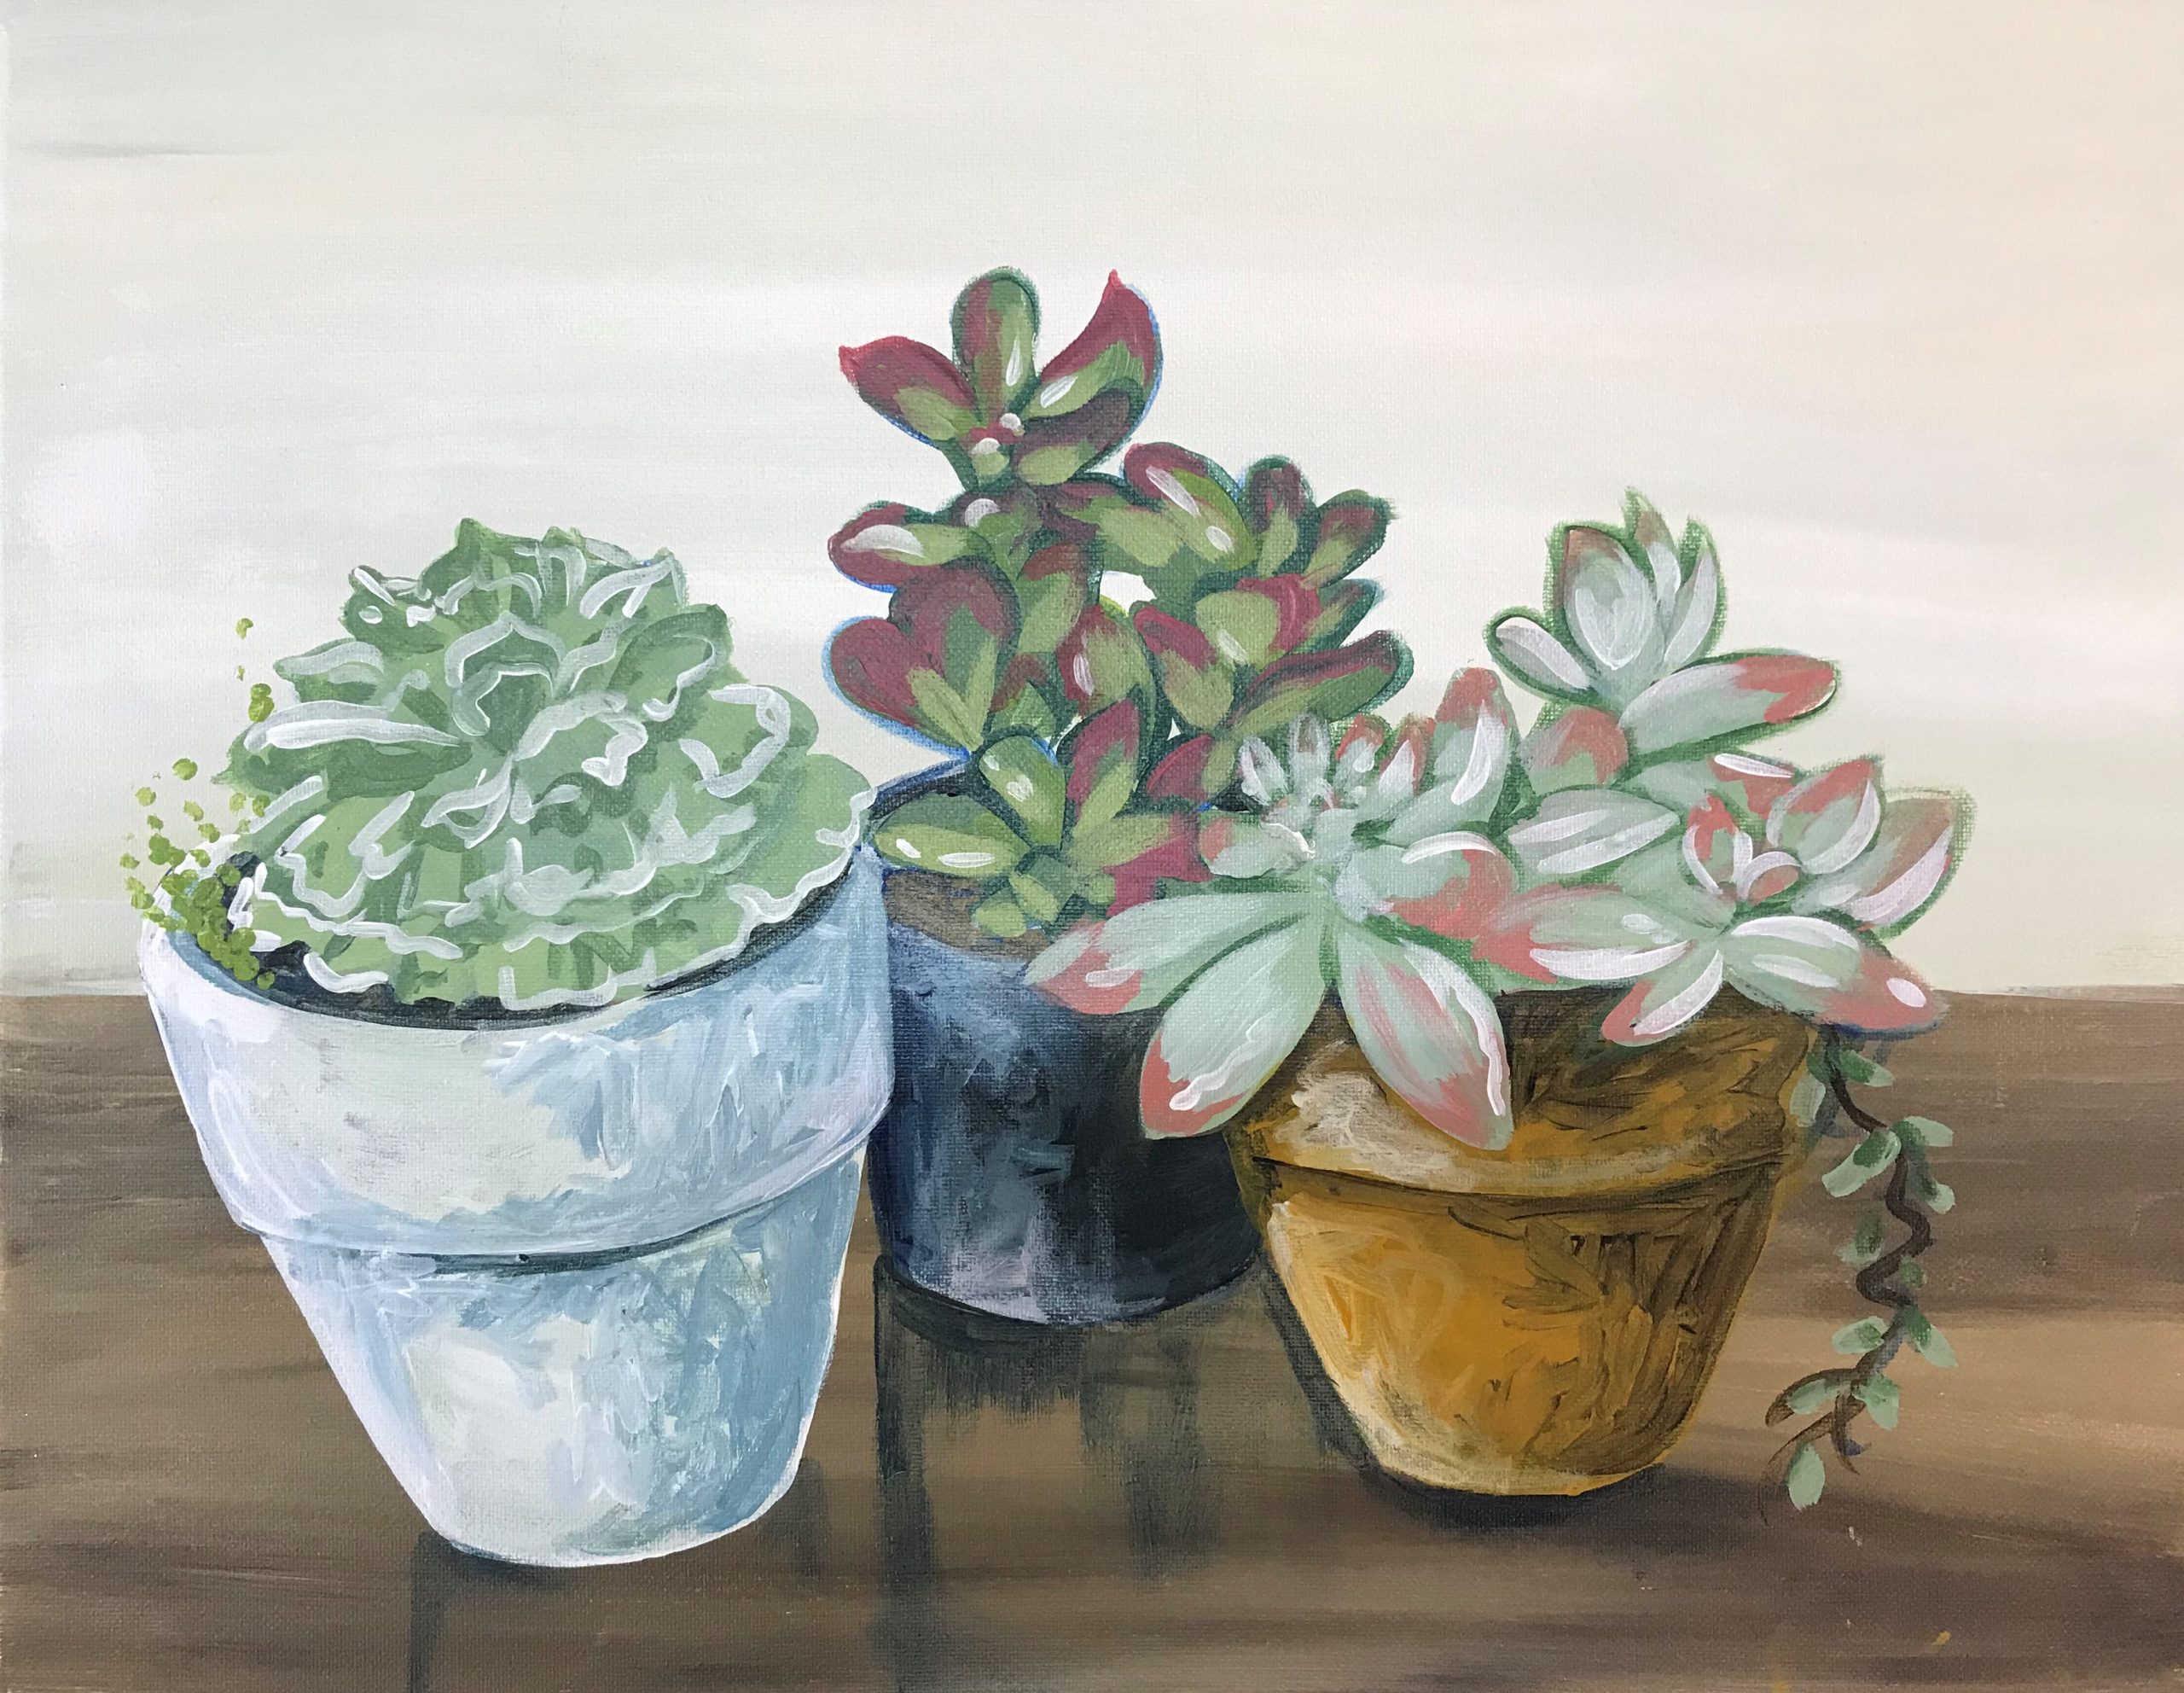 An image of painted succulents.